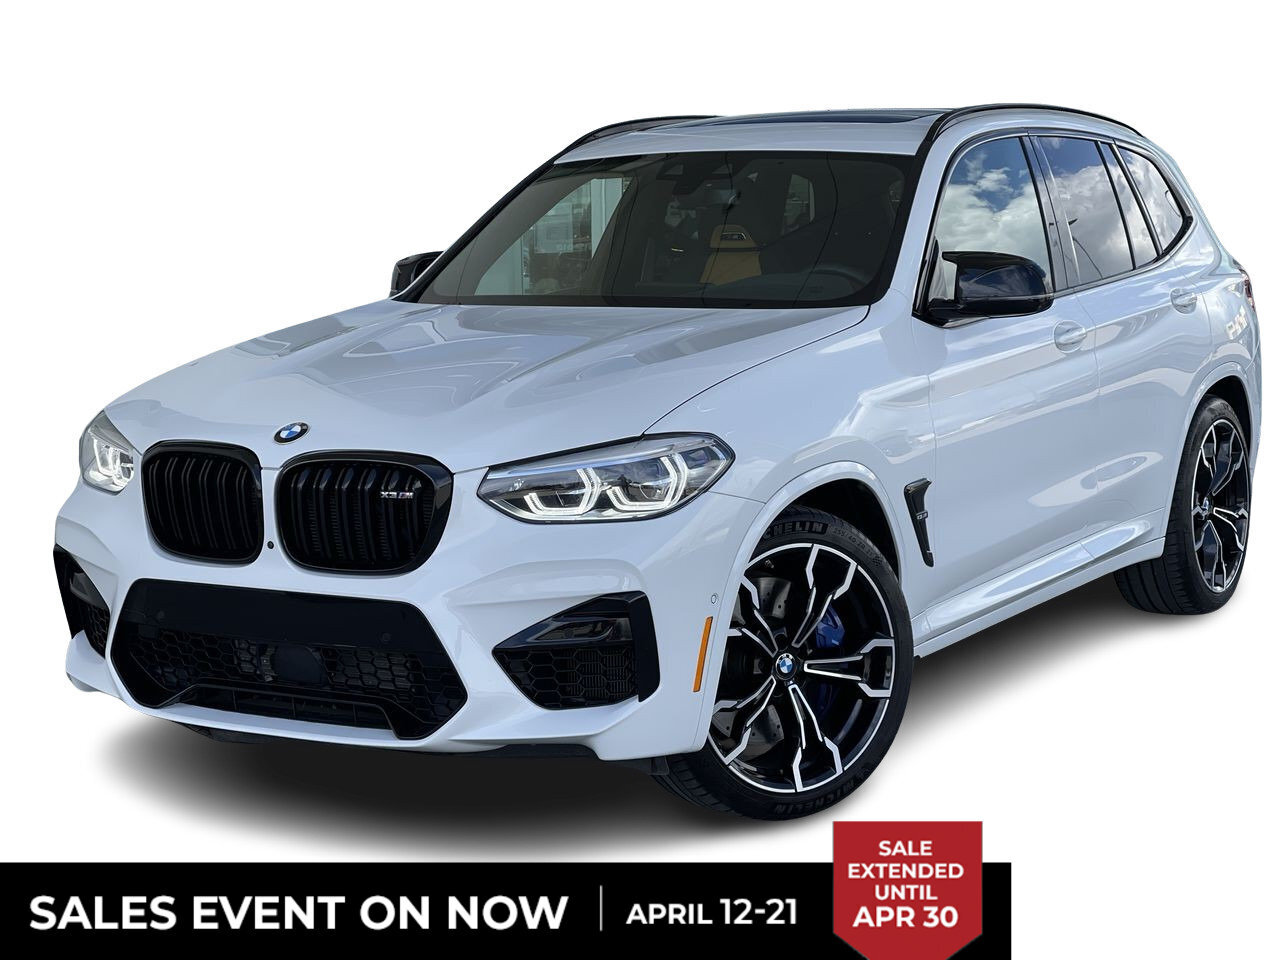 2020 BMW X3 M Competiton, 503 HP, Leather, Nav Locally Owned / 